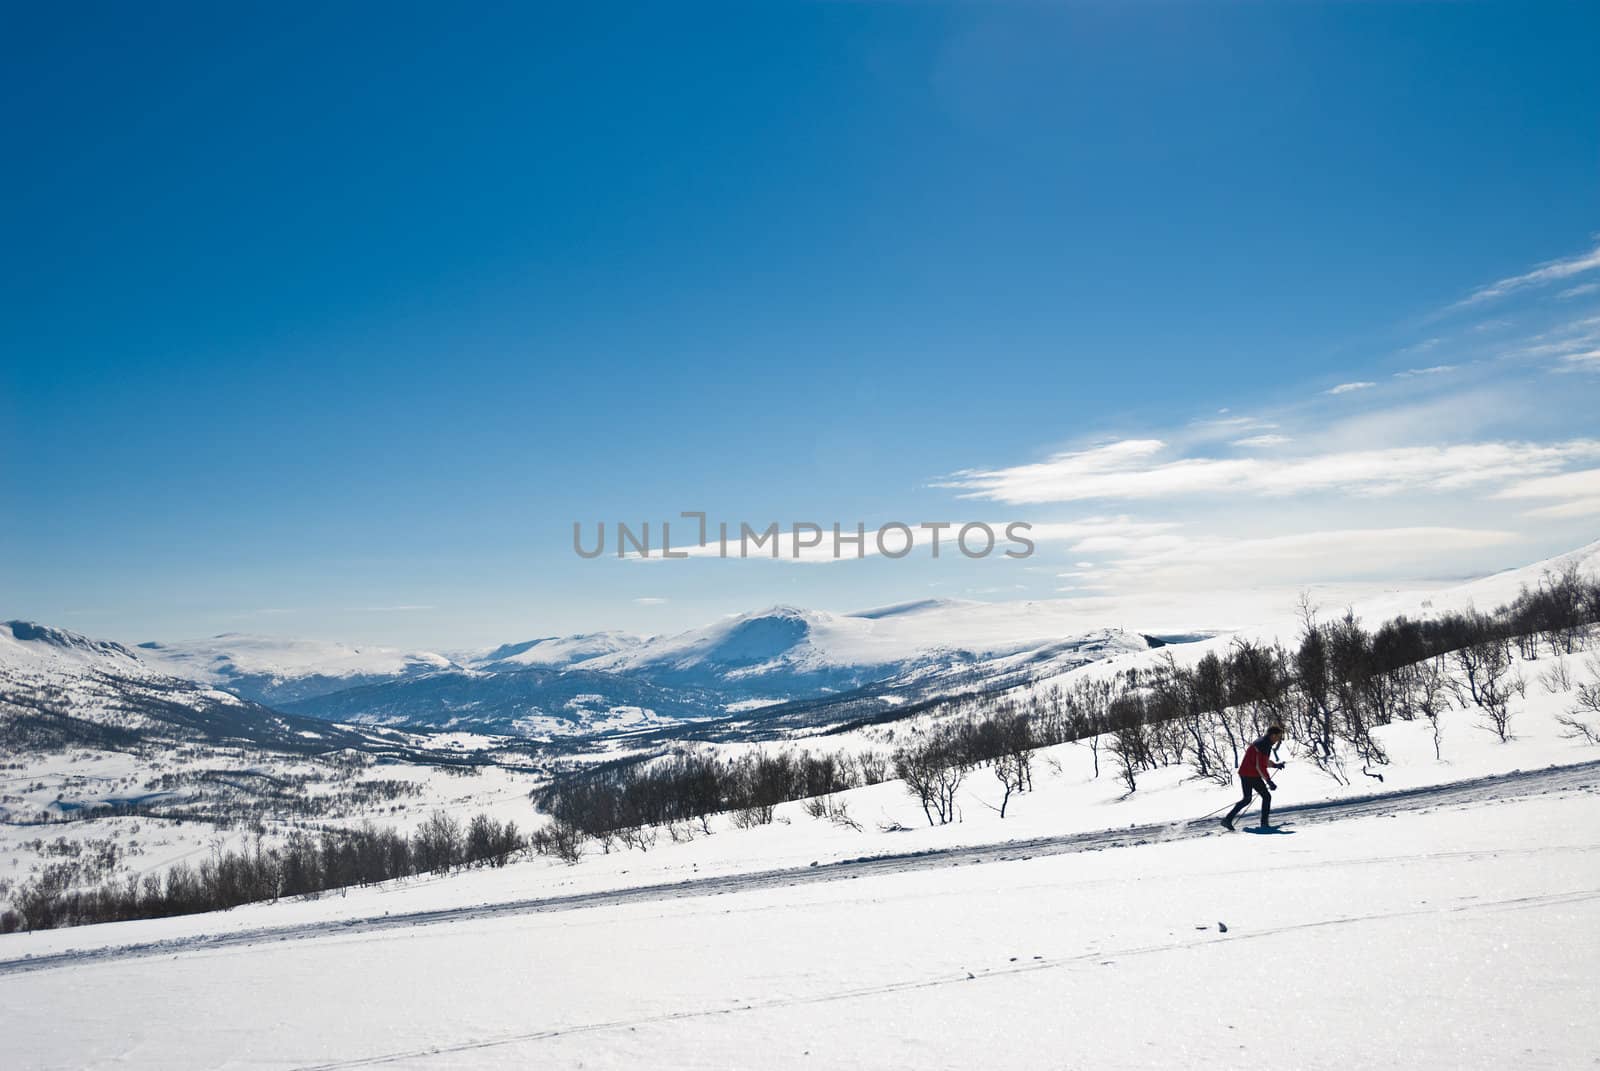 Single skier exercising. A typical Norwegian winter landscape as the beautiful background. Picture taken in Oppdal, Norway.